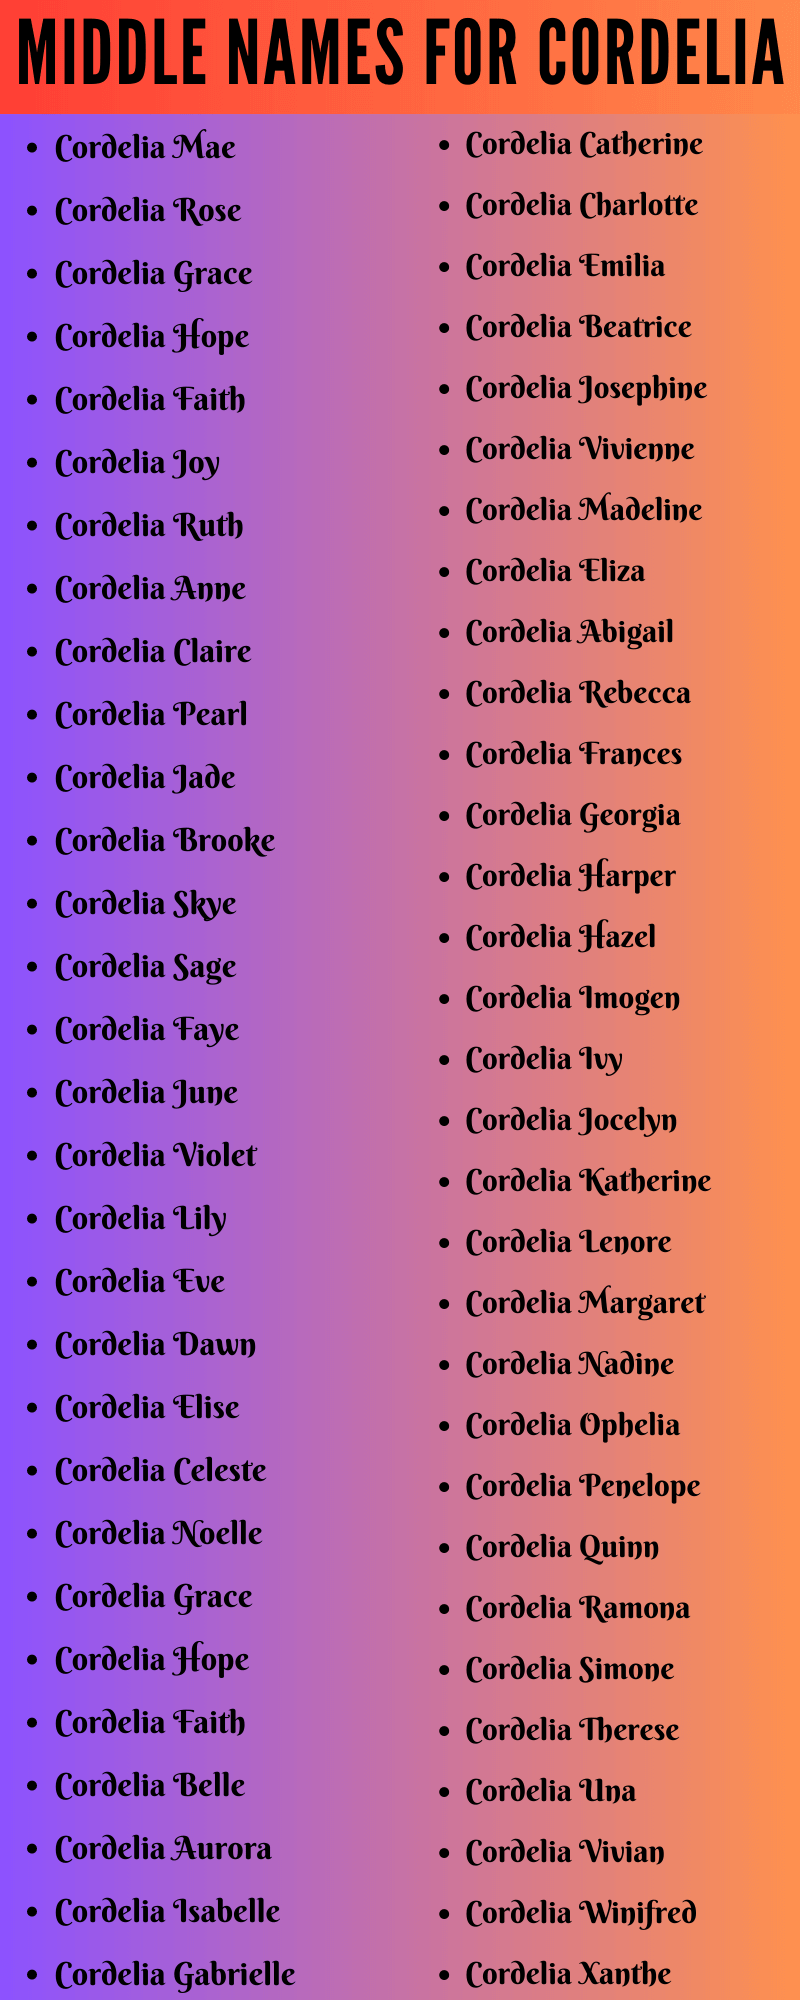 400 Creative Middle Names For Cordelia